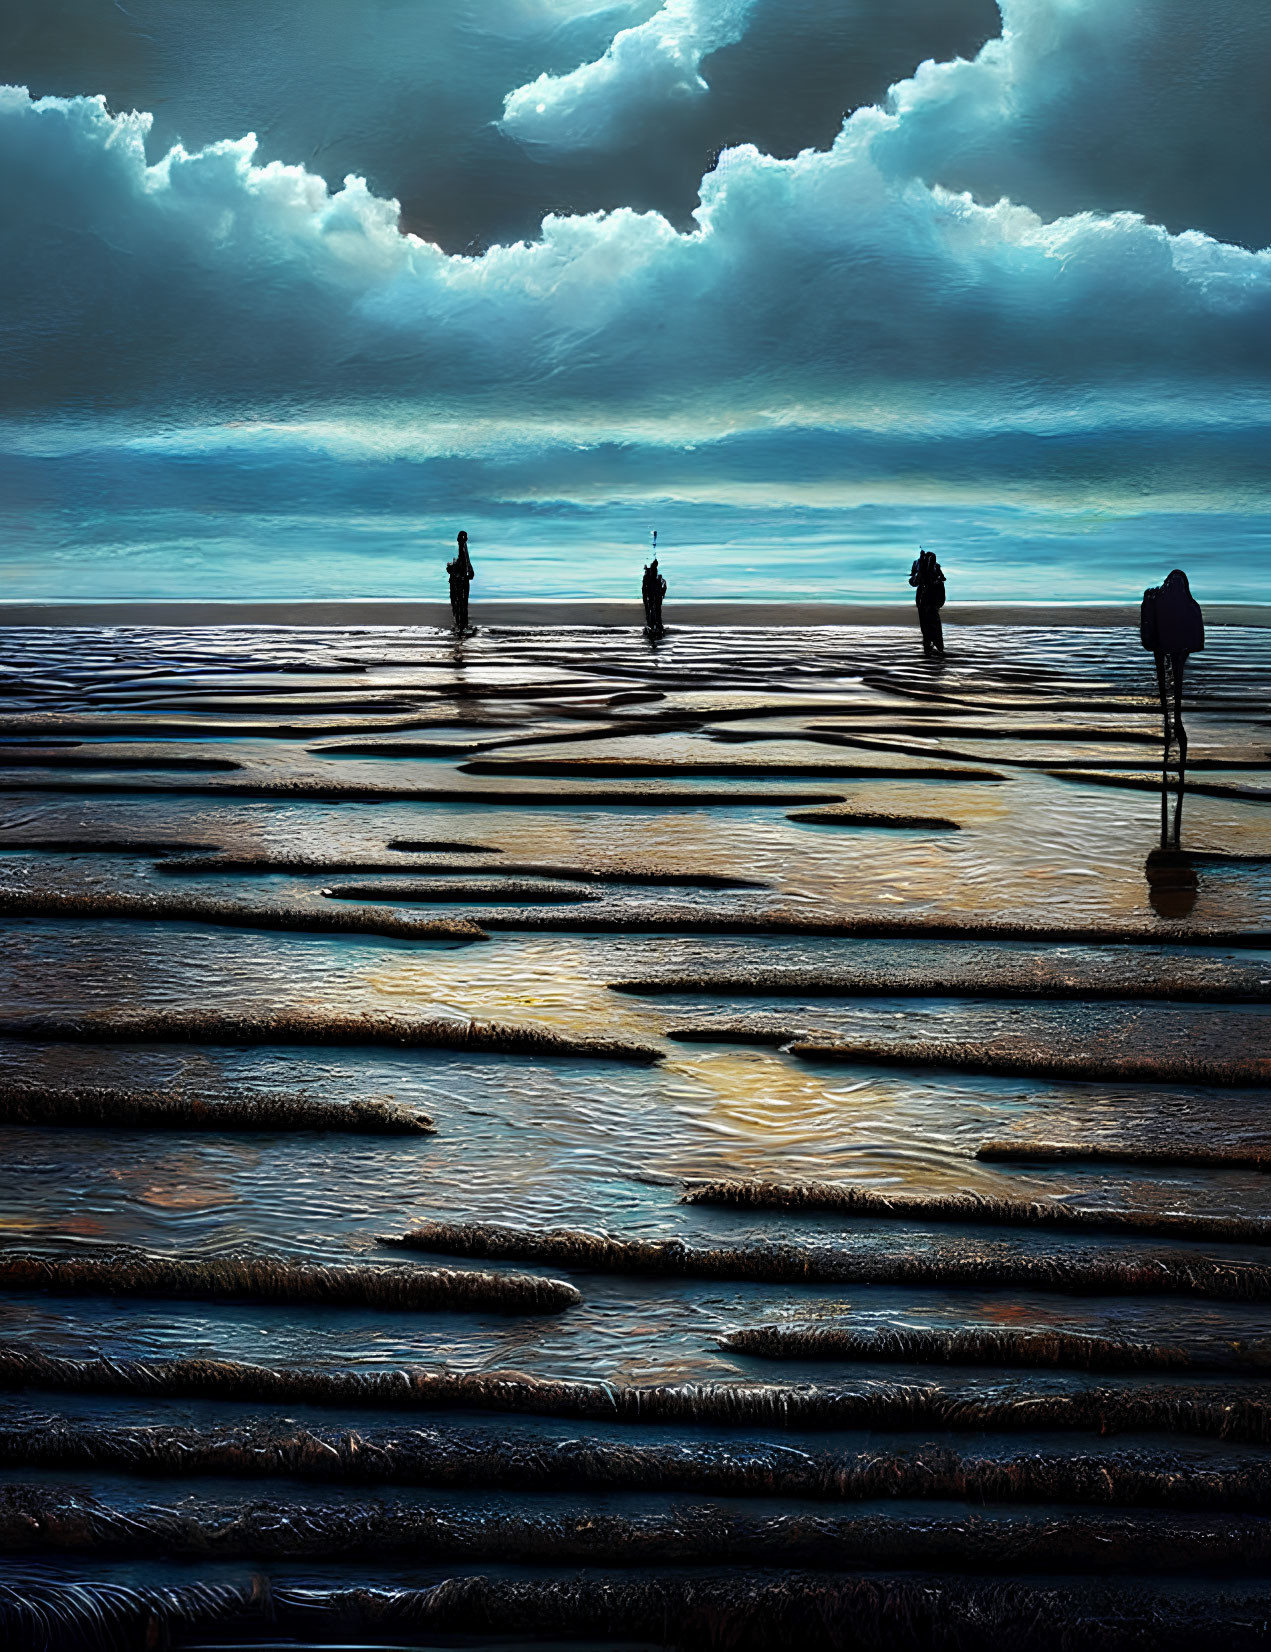 Three people walking on textured tidal flats under dramatic cloudy sky.